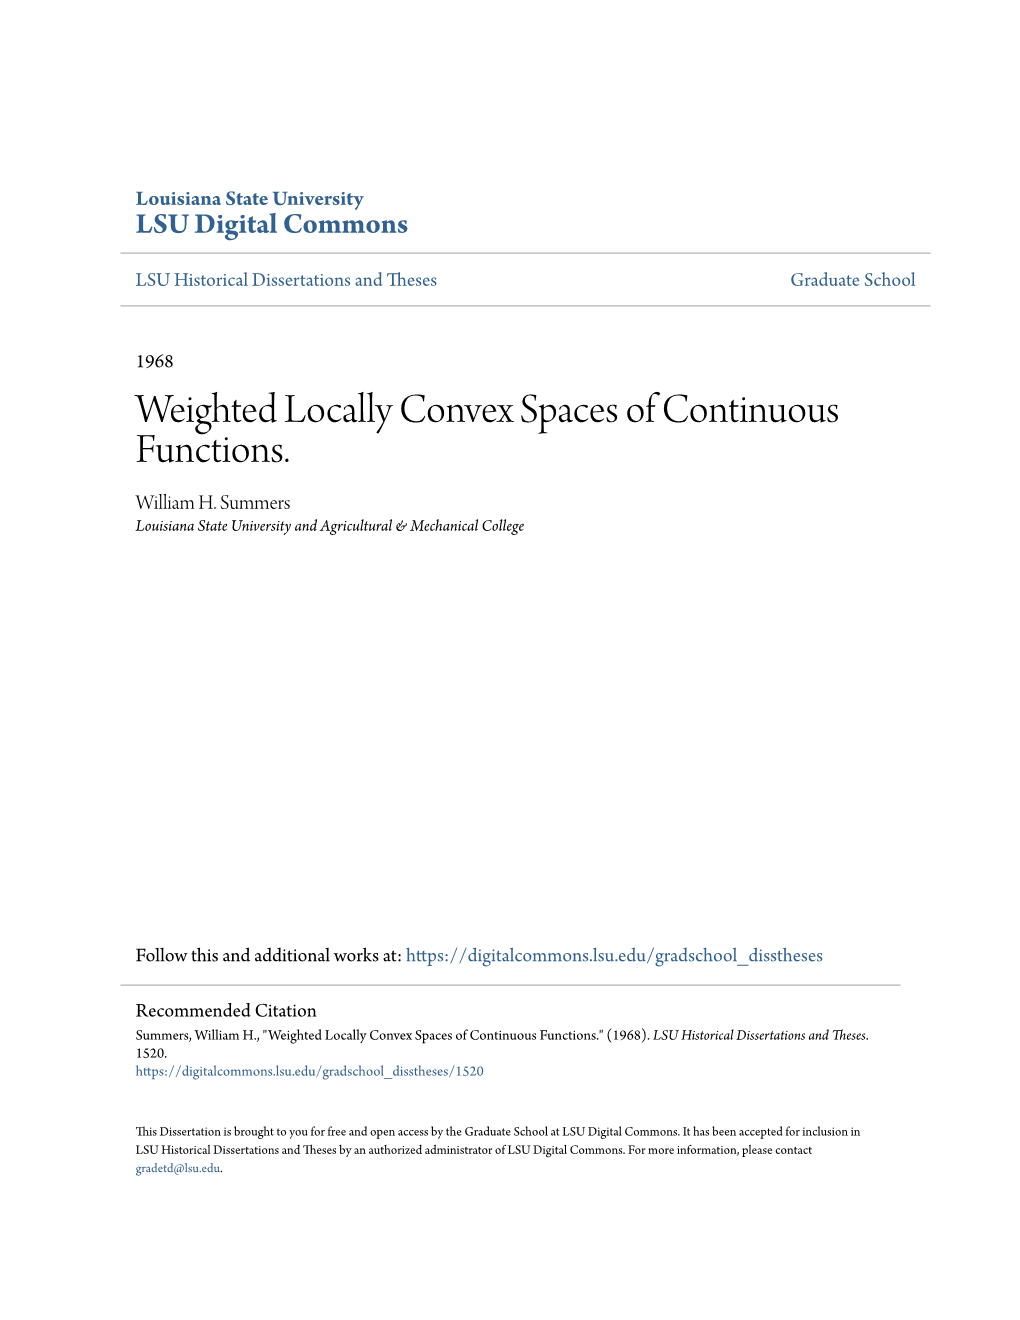 Weighted Locally Convex Spaces of Continuous Functions. William H